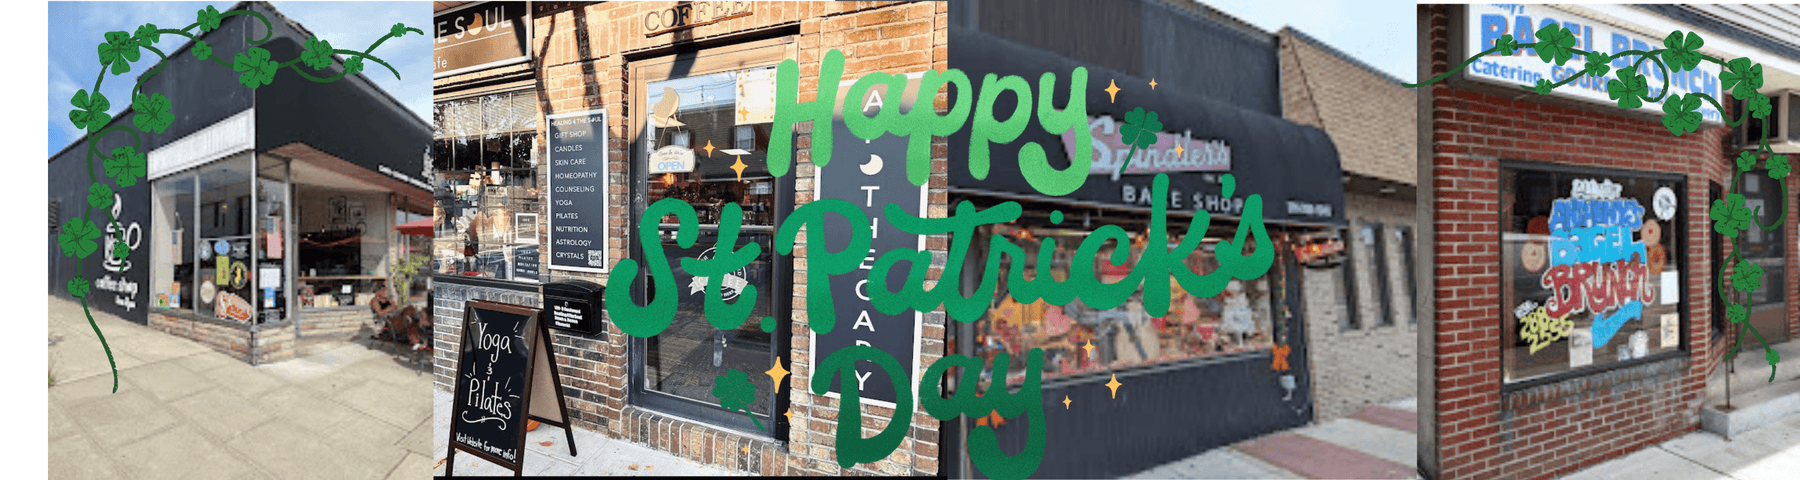 Celebrate St. Patrick's Day in Hasbrouck Heights with Local Delights and Festive Eats - Modern Memory Design Picture frames - NJ Frame shop Custom framing